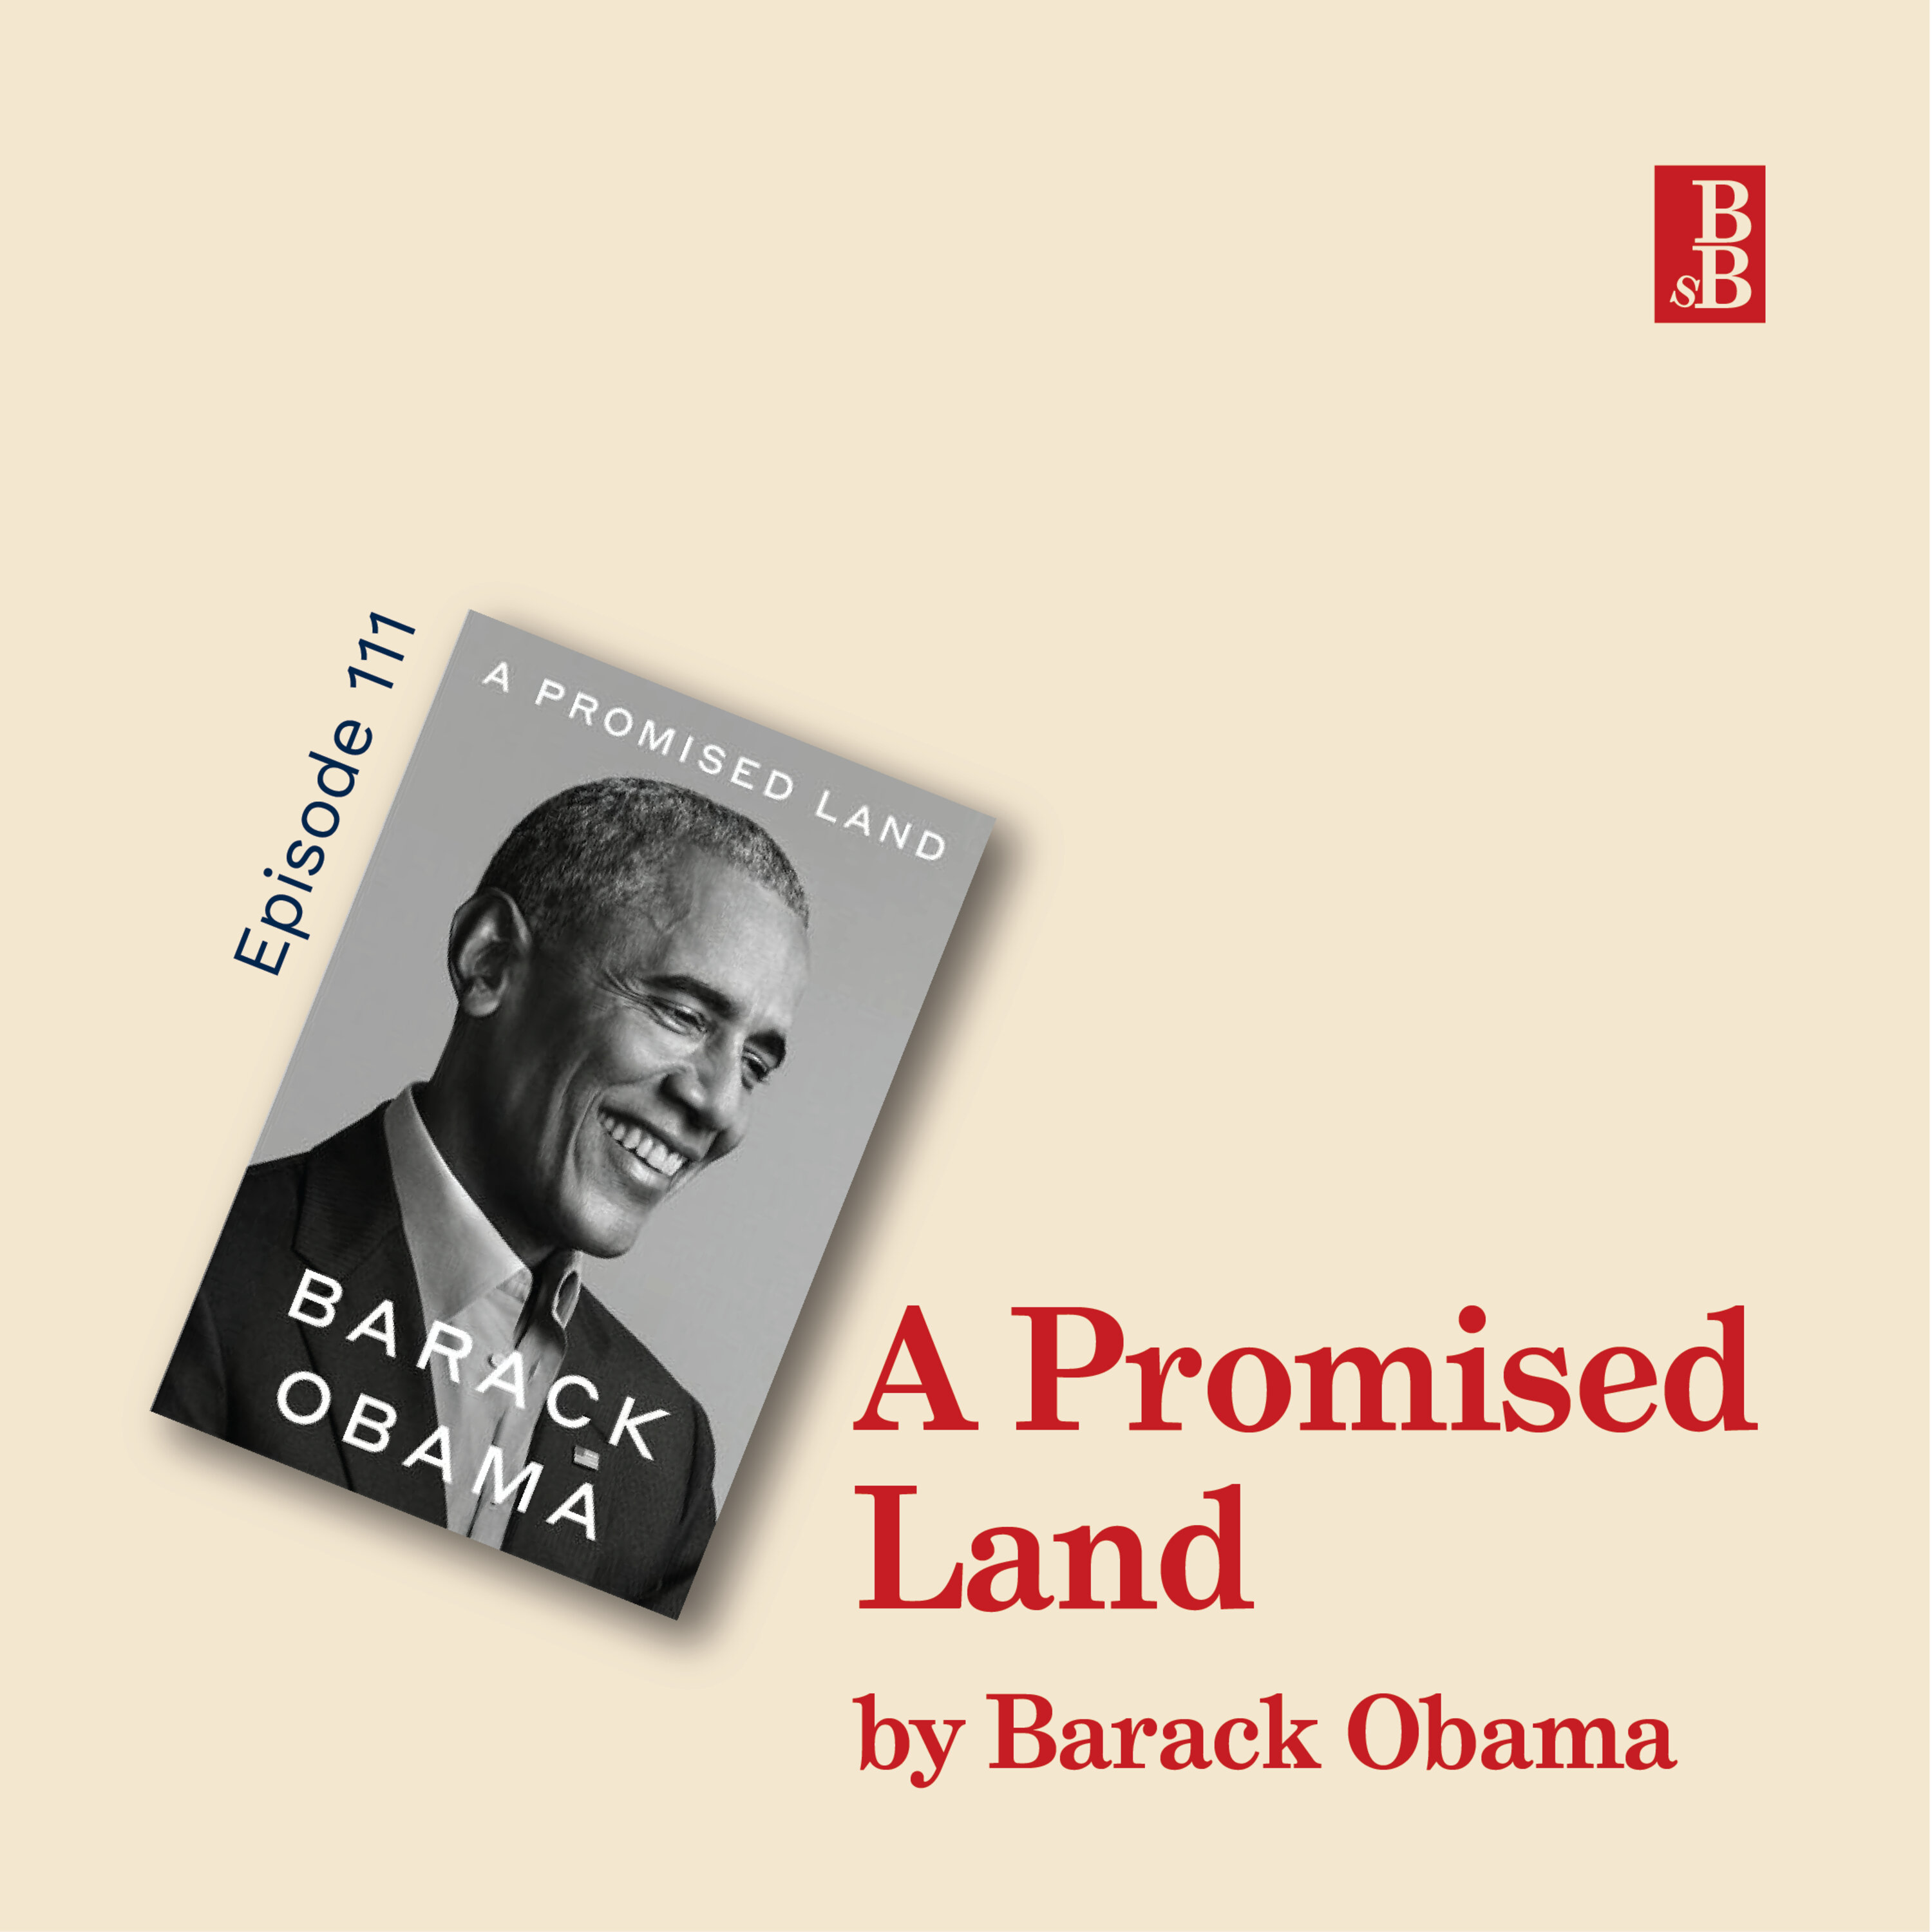 A Promised Land by Barack Obama: the ultimate lessons on leadership